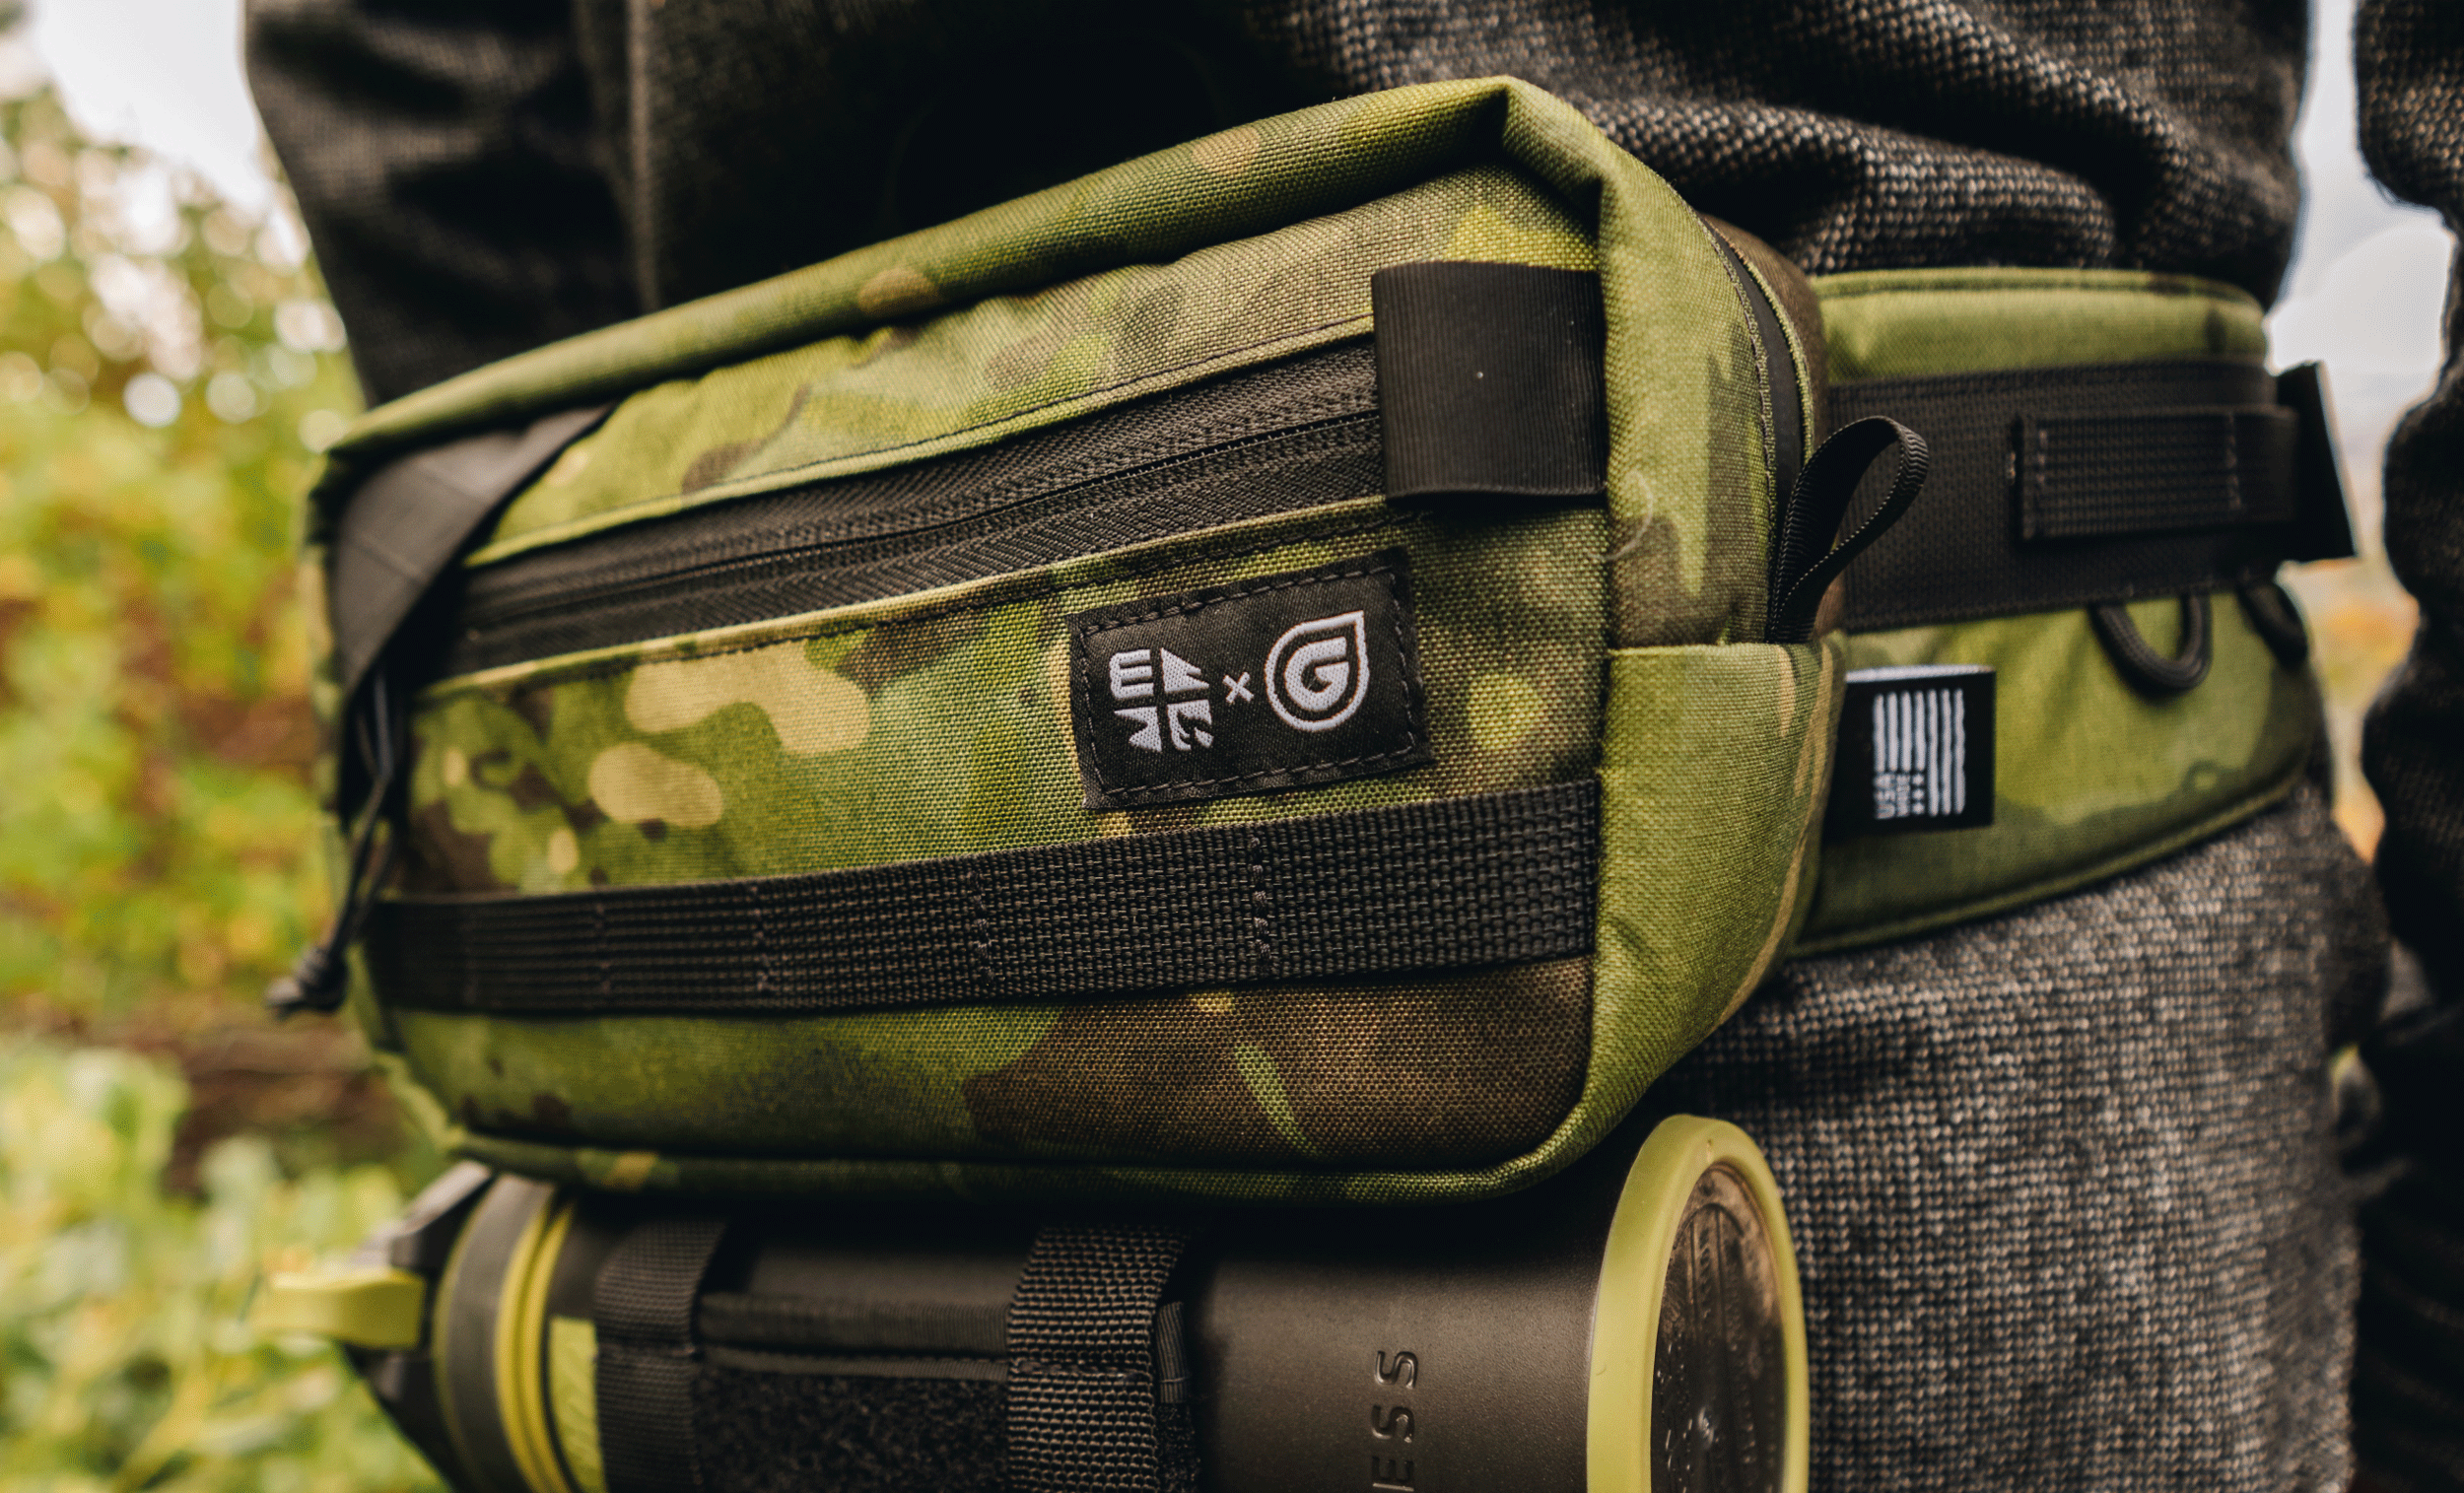 New Grayl® Hip Pack MultiCam® Colors in Tropical, Black, Arid, and Alpine.